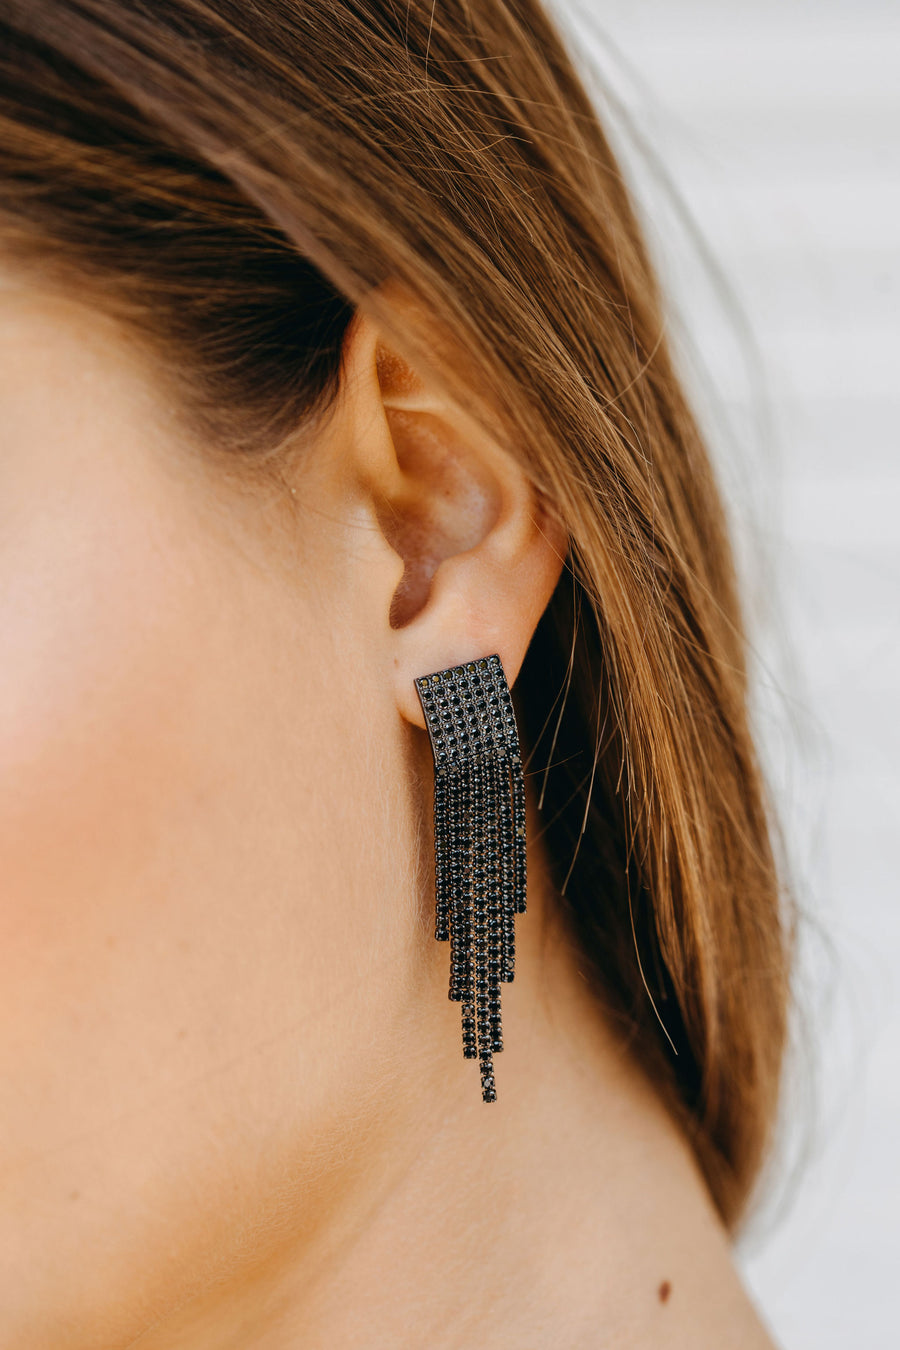 Styled image of our Equinox earrings being worn by brunette woman.